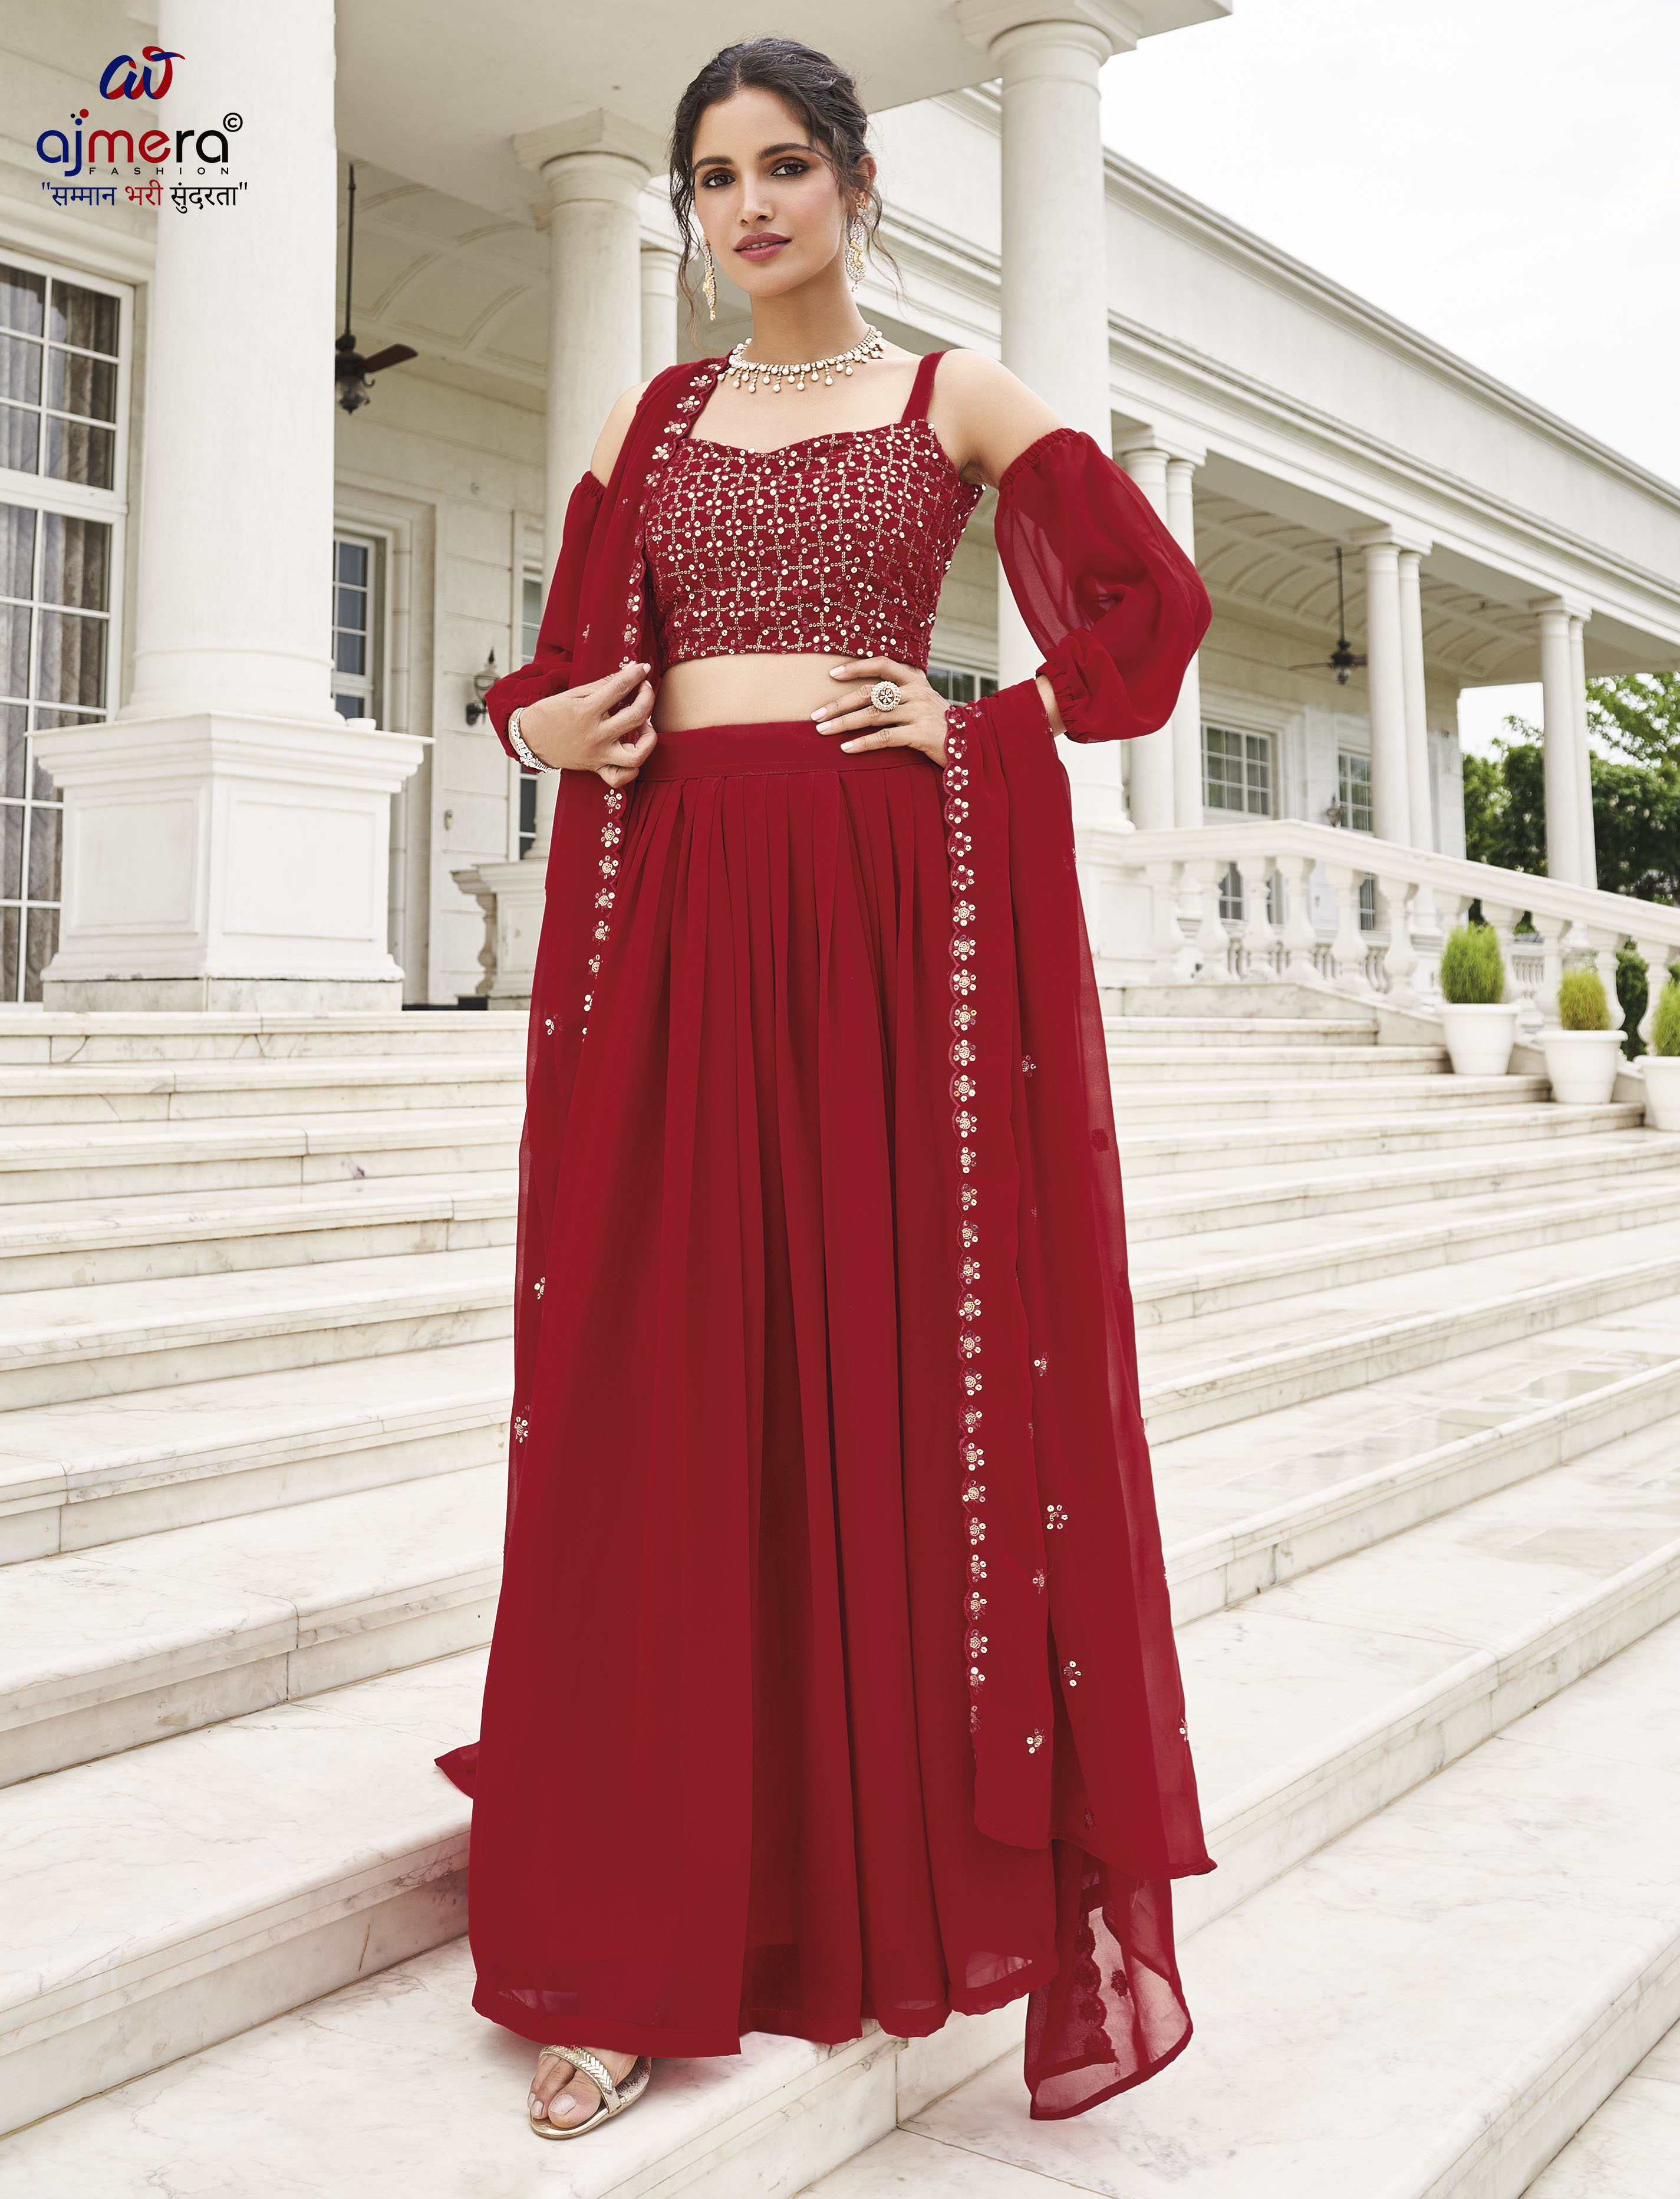 Partywear Lahenga Manufacturers, Suppliers in Patna